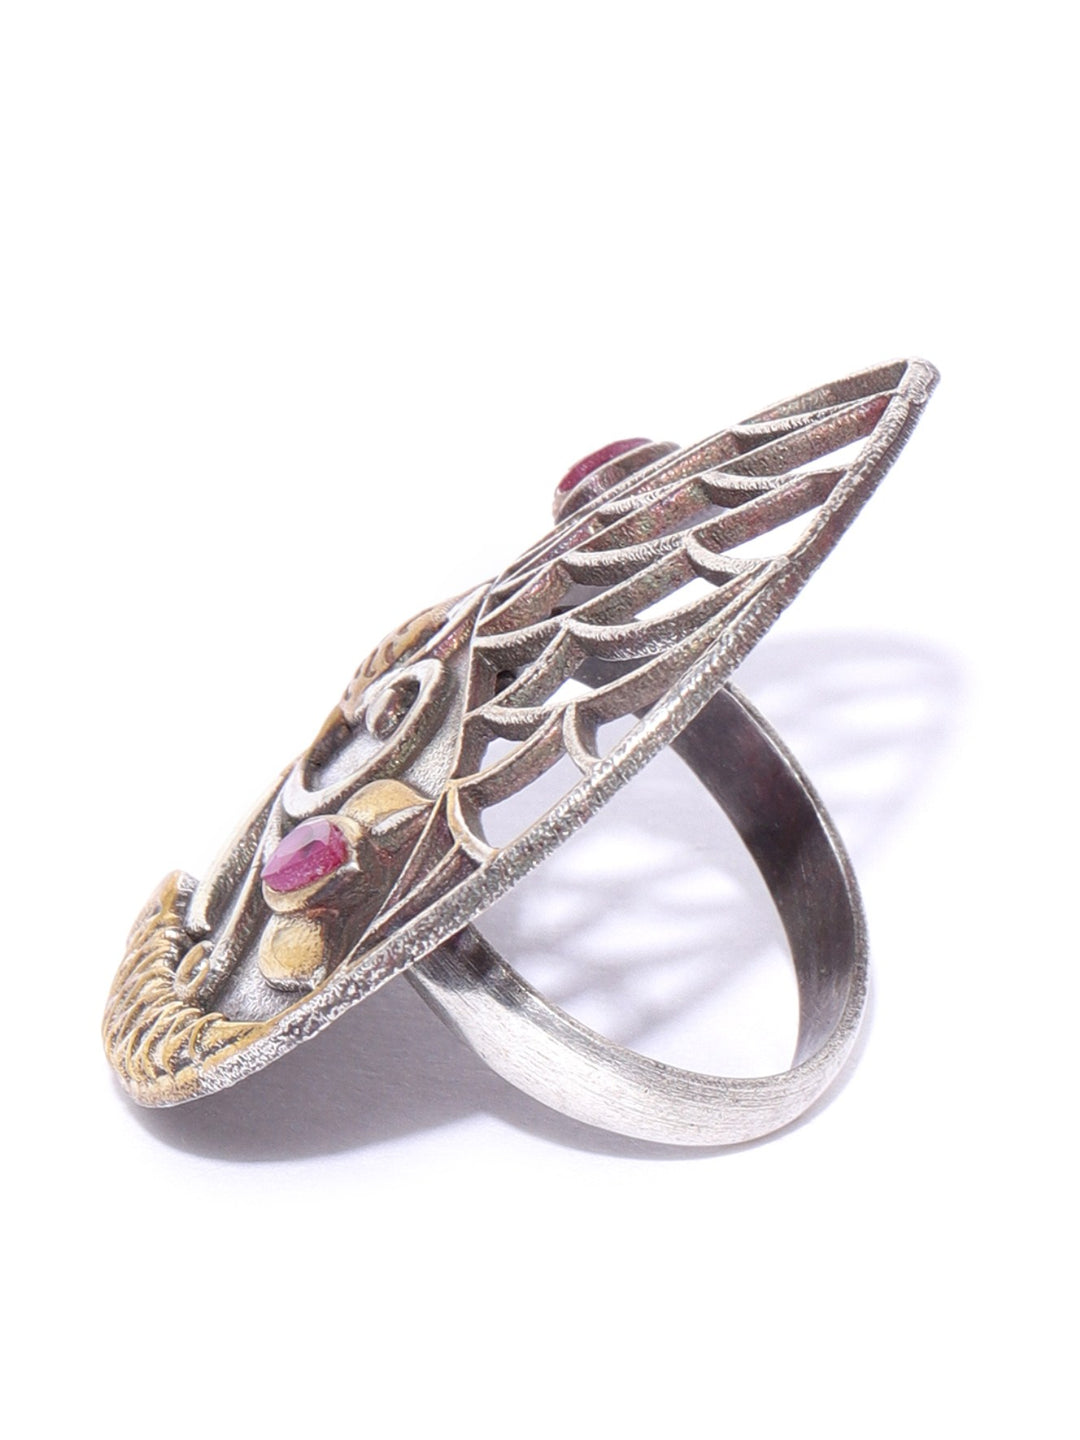 Oxidized Dual-Toned Ruby Studded Adjustable Ring